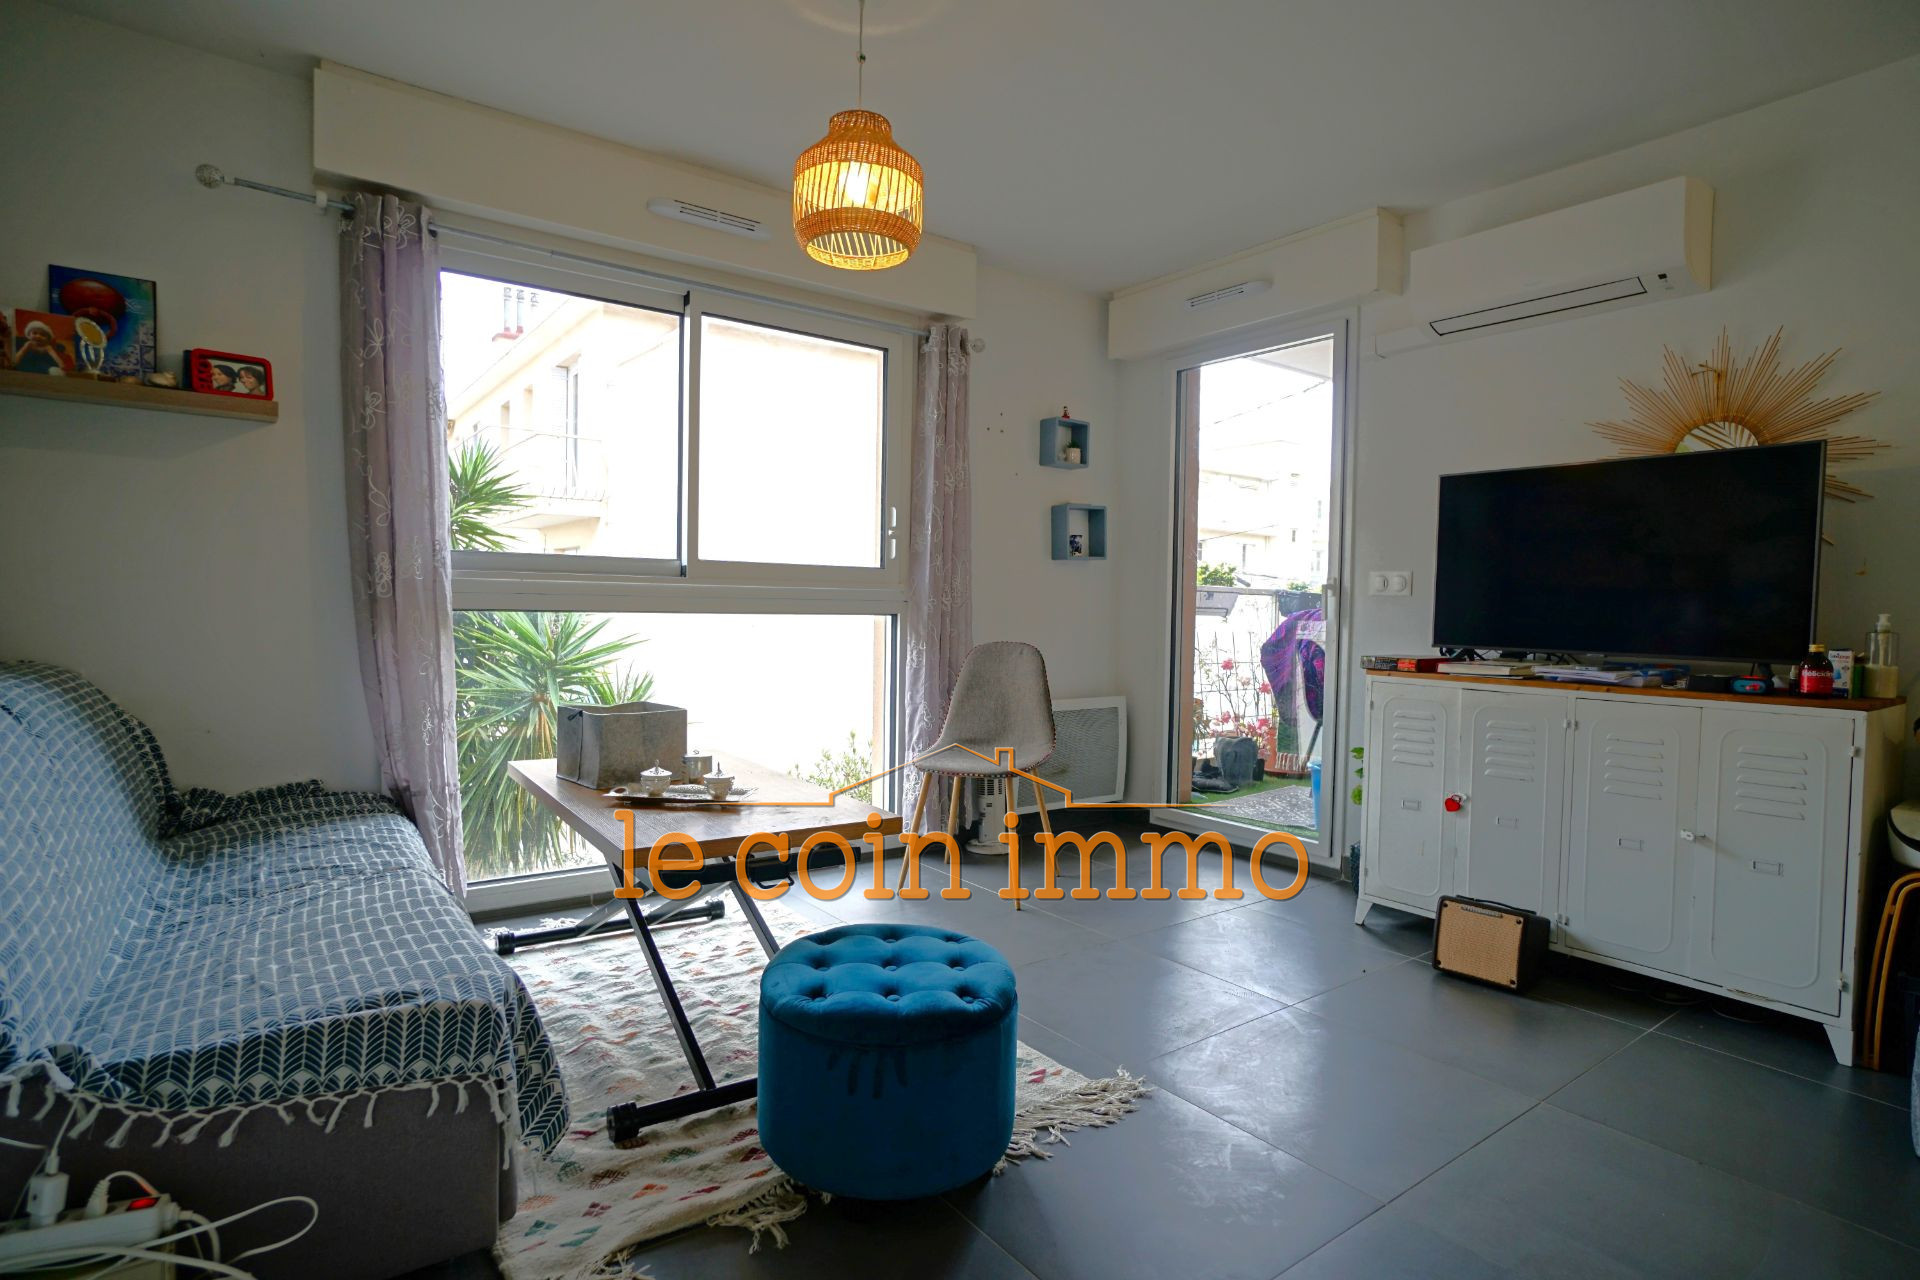 Vente Appartement 35m² à Antibes (06600) - Le Coin Immo